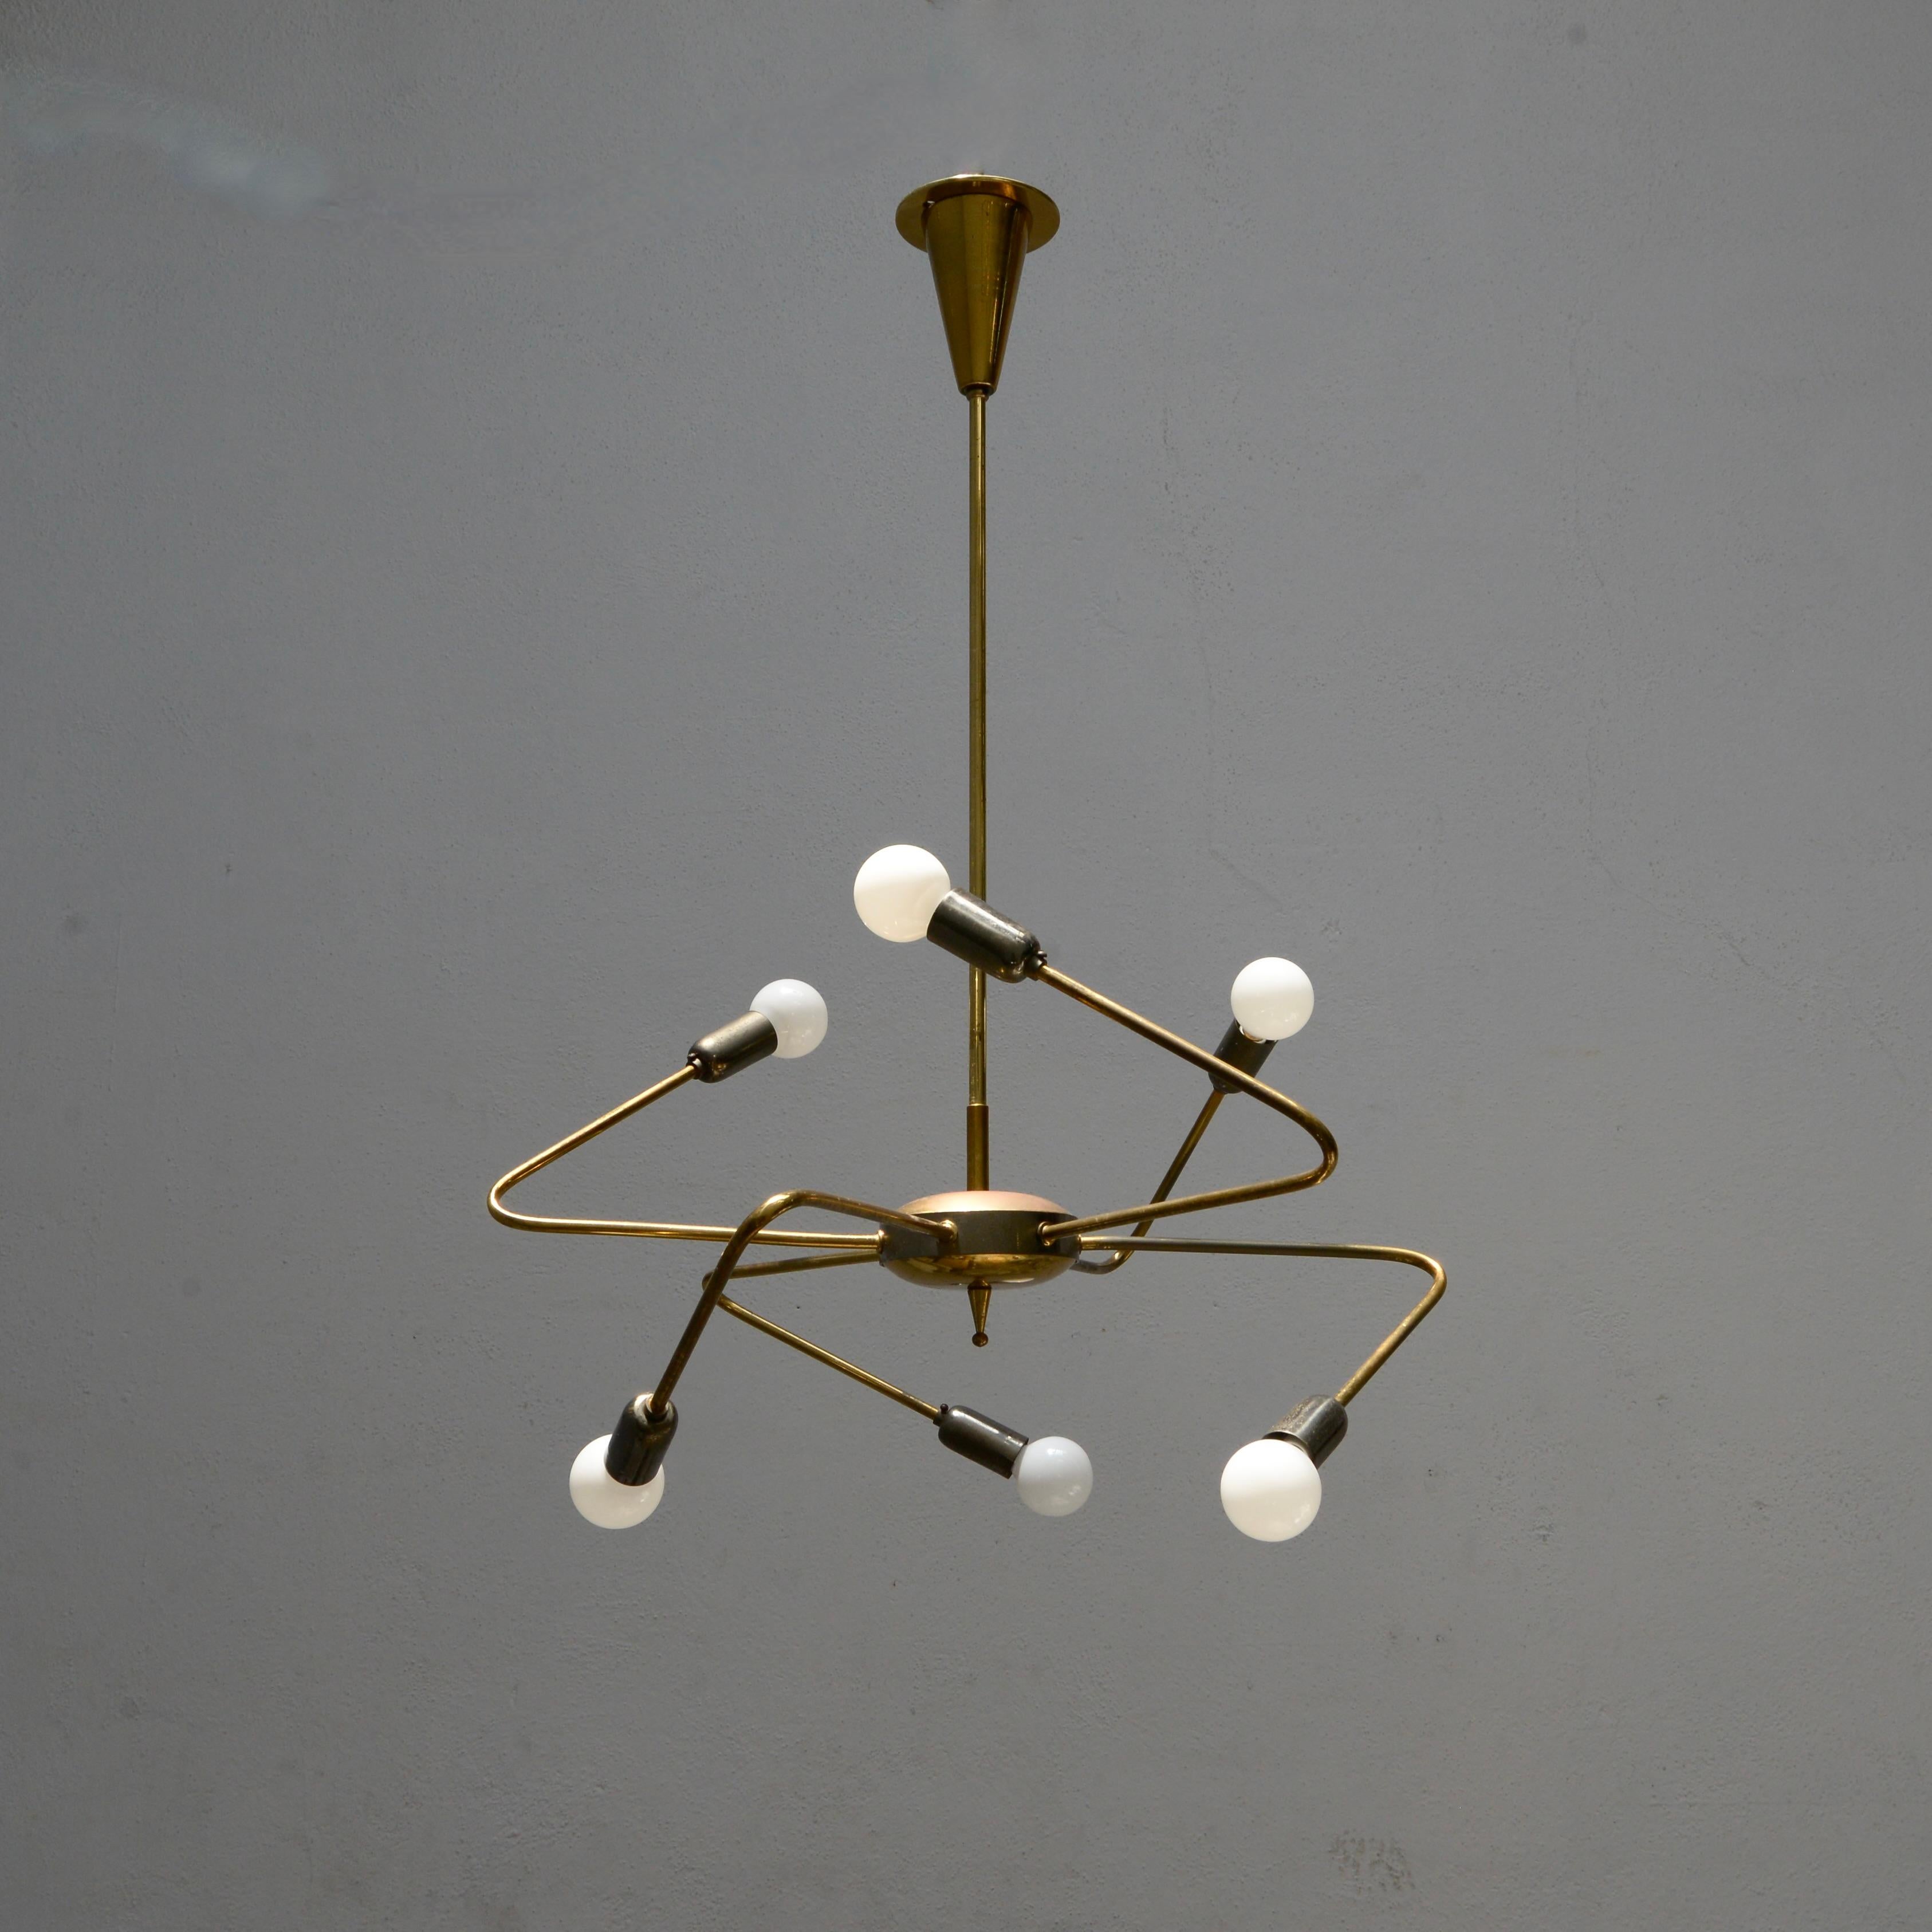 Wonderful  1950s brass Stilnovo Sputnik hanging fixture from Italy. Partially restored and rewired with 6 E12 candelabra based sockets, for use in the US. Original brass varied finishes. Light bulbs and all mounting hardware included with order.